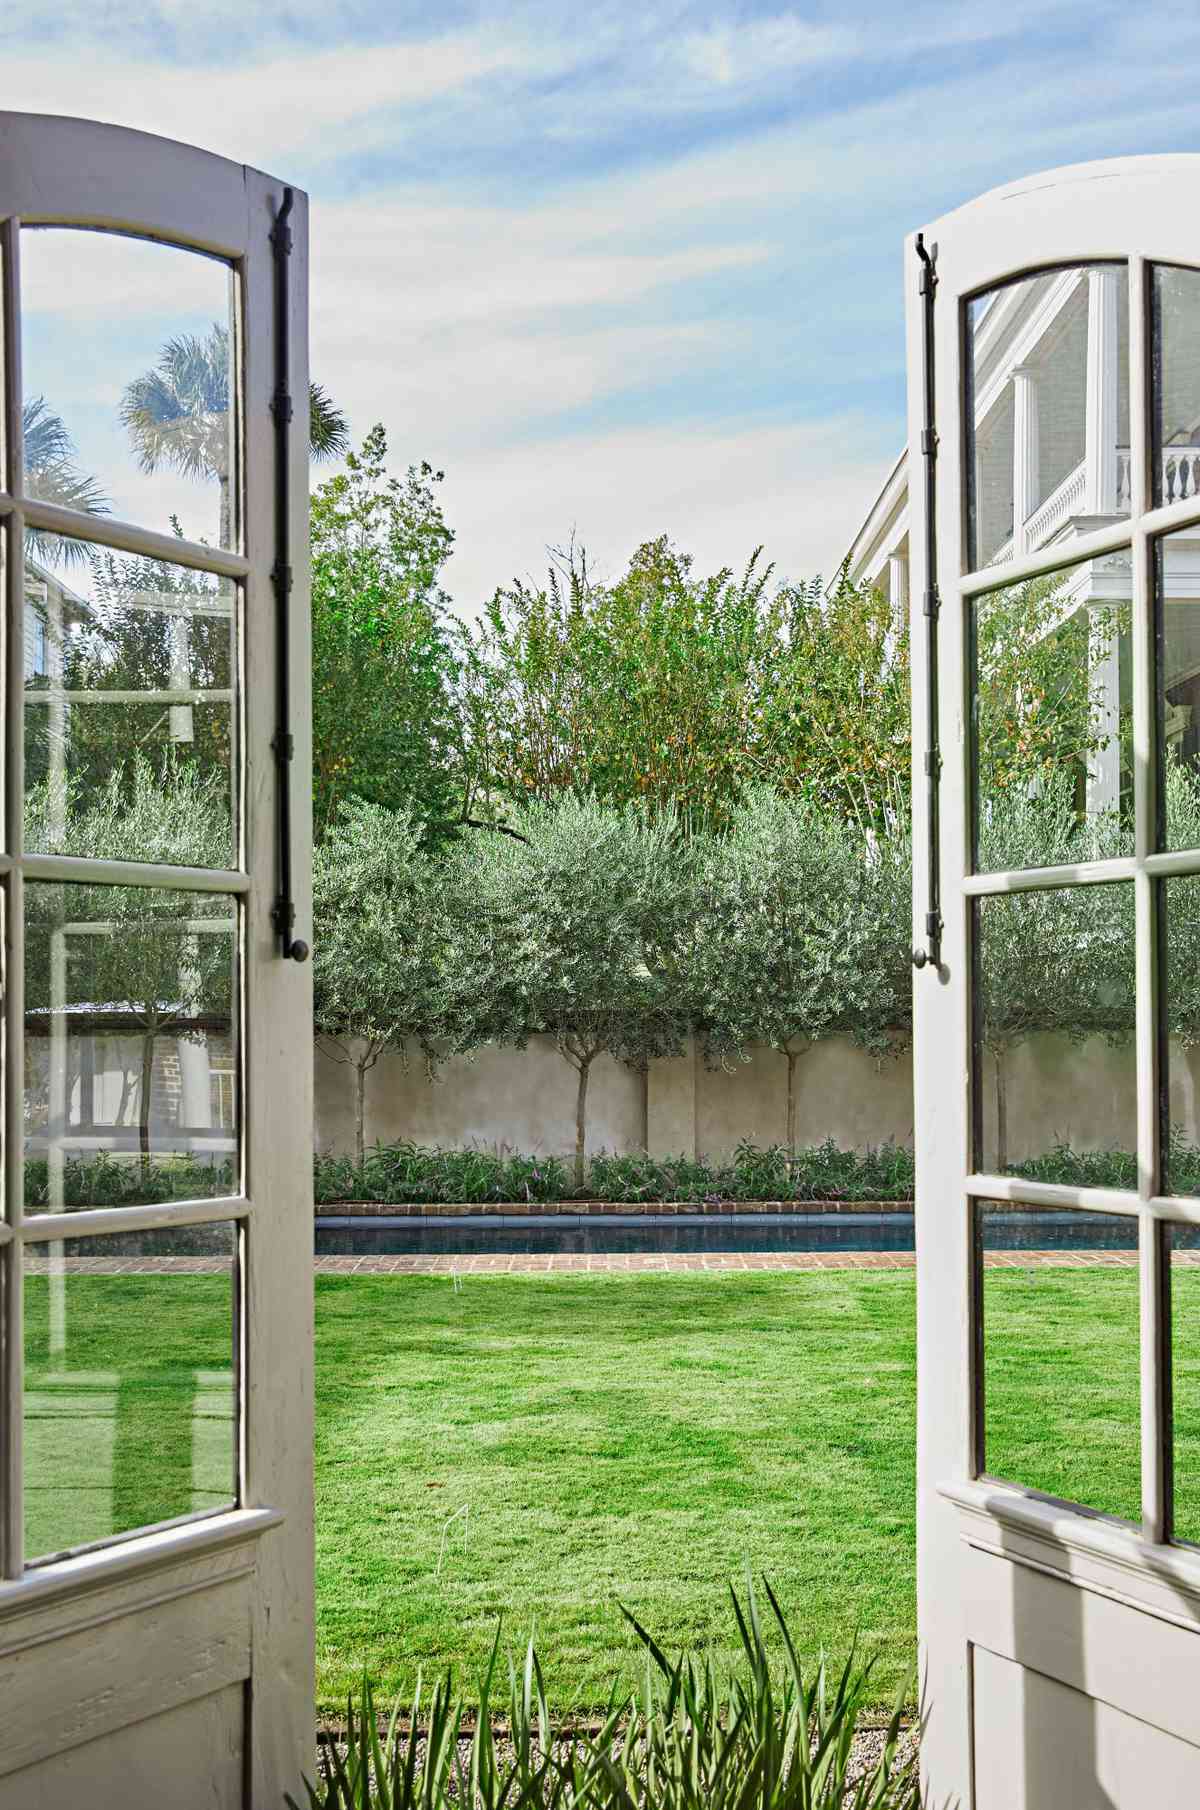 French Doors opening onto a grassy lawn